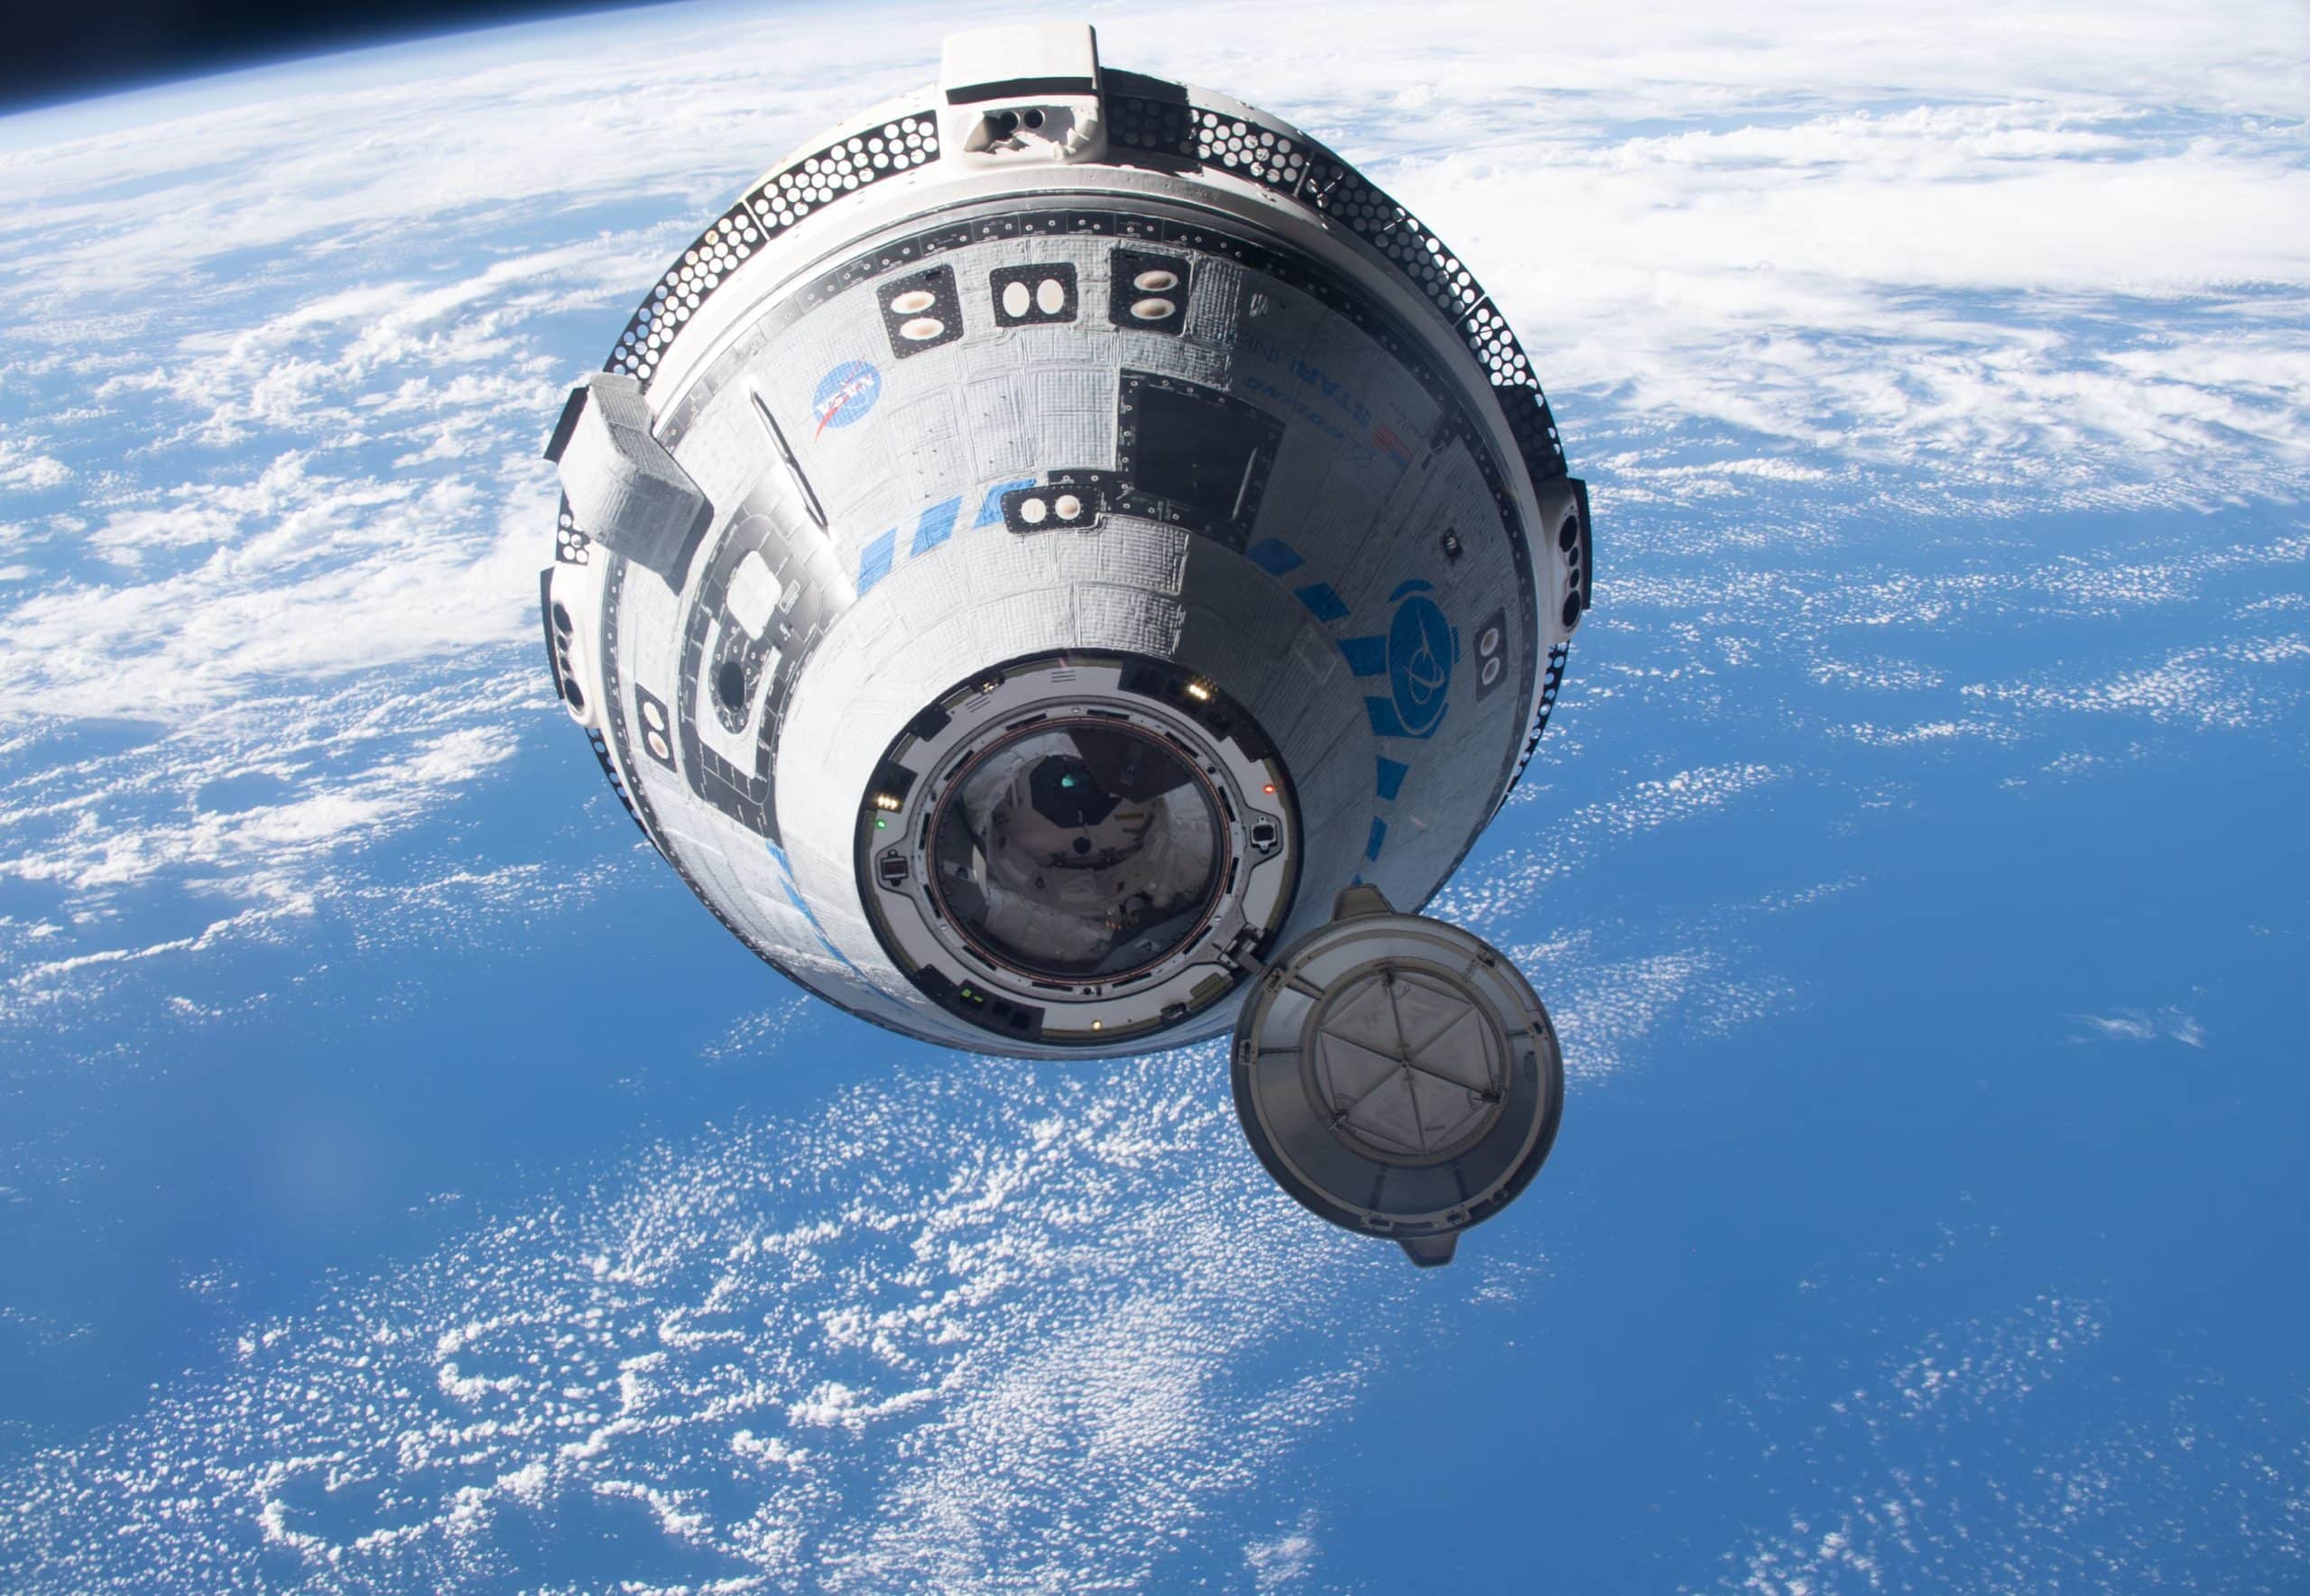 NASA Confirms Overheating Issues with Stranded Starliner Spacecraft's Thrusters